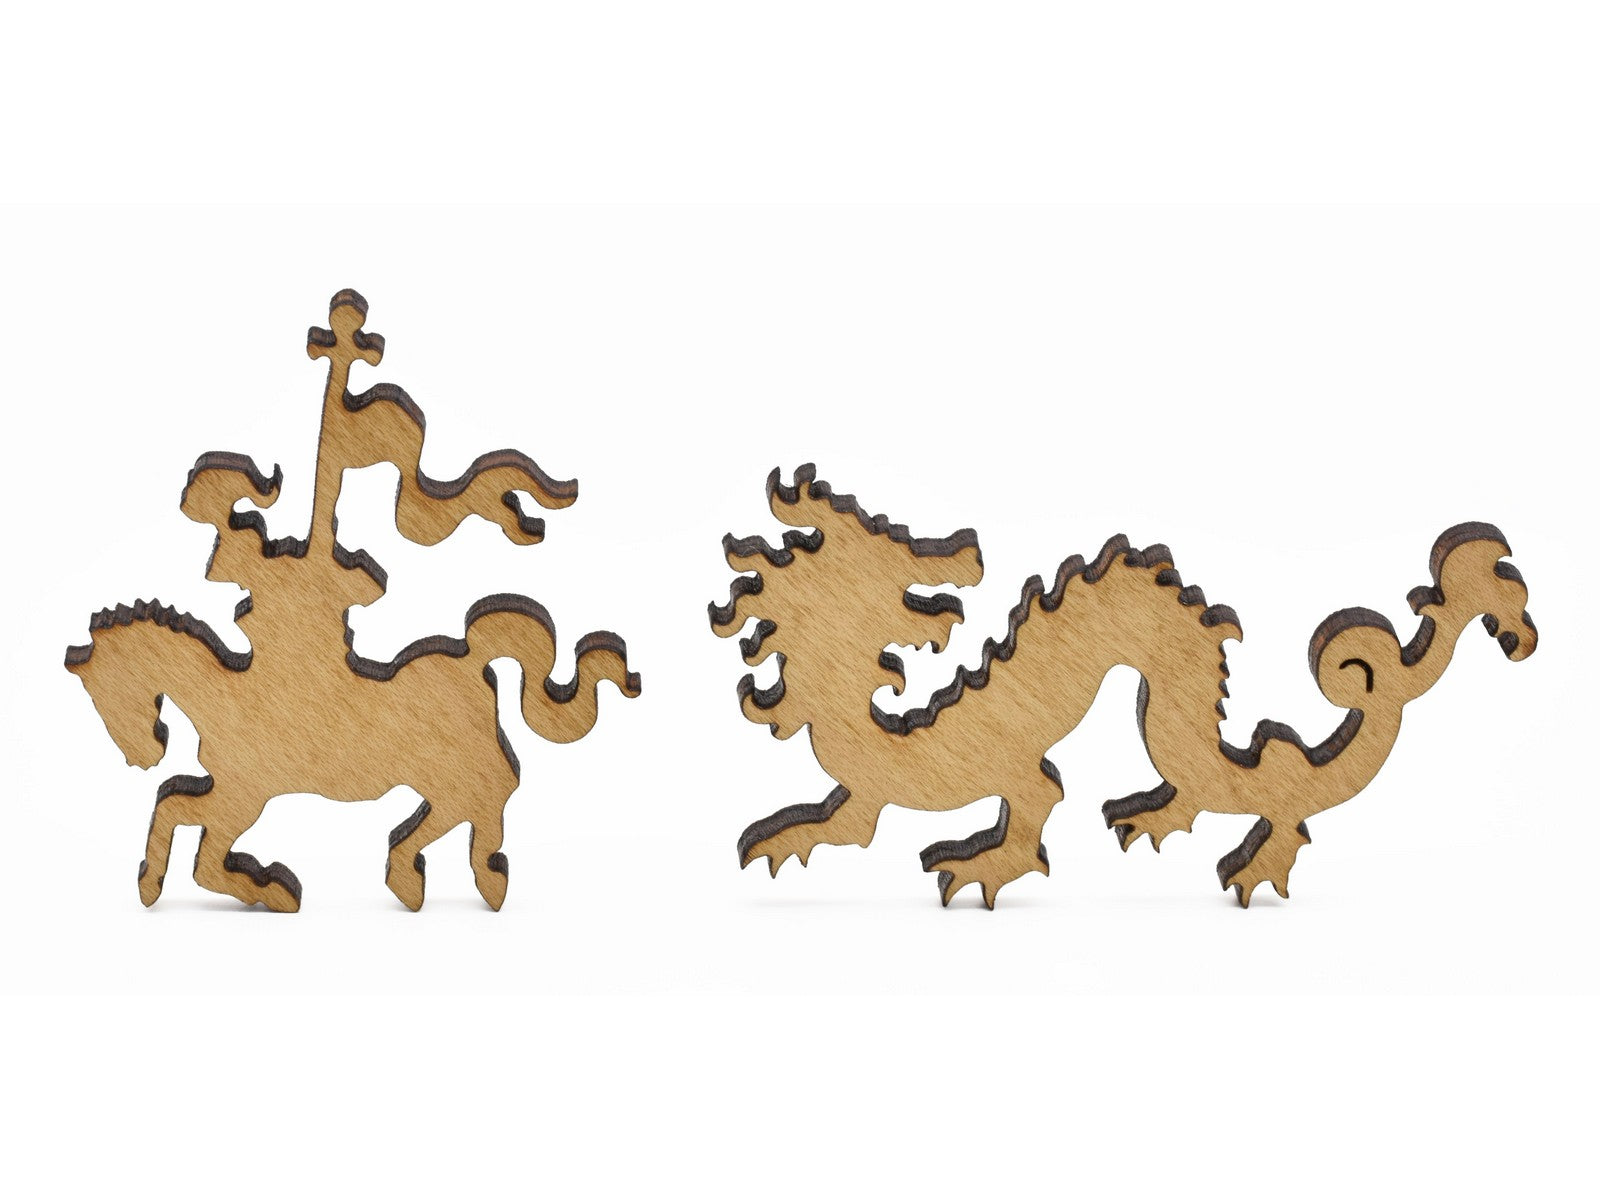 A closeup of pieces in the shape of a dragon and a knight.